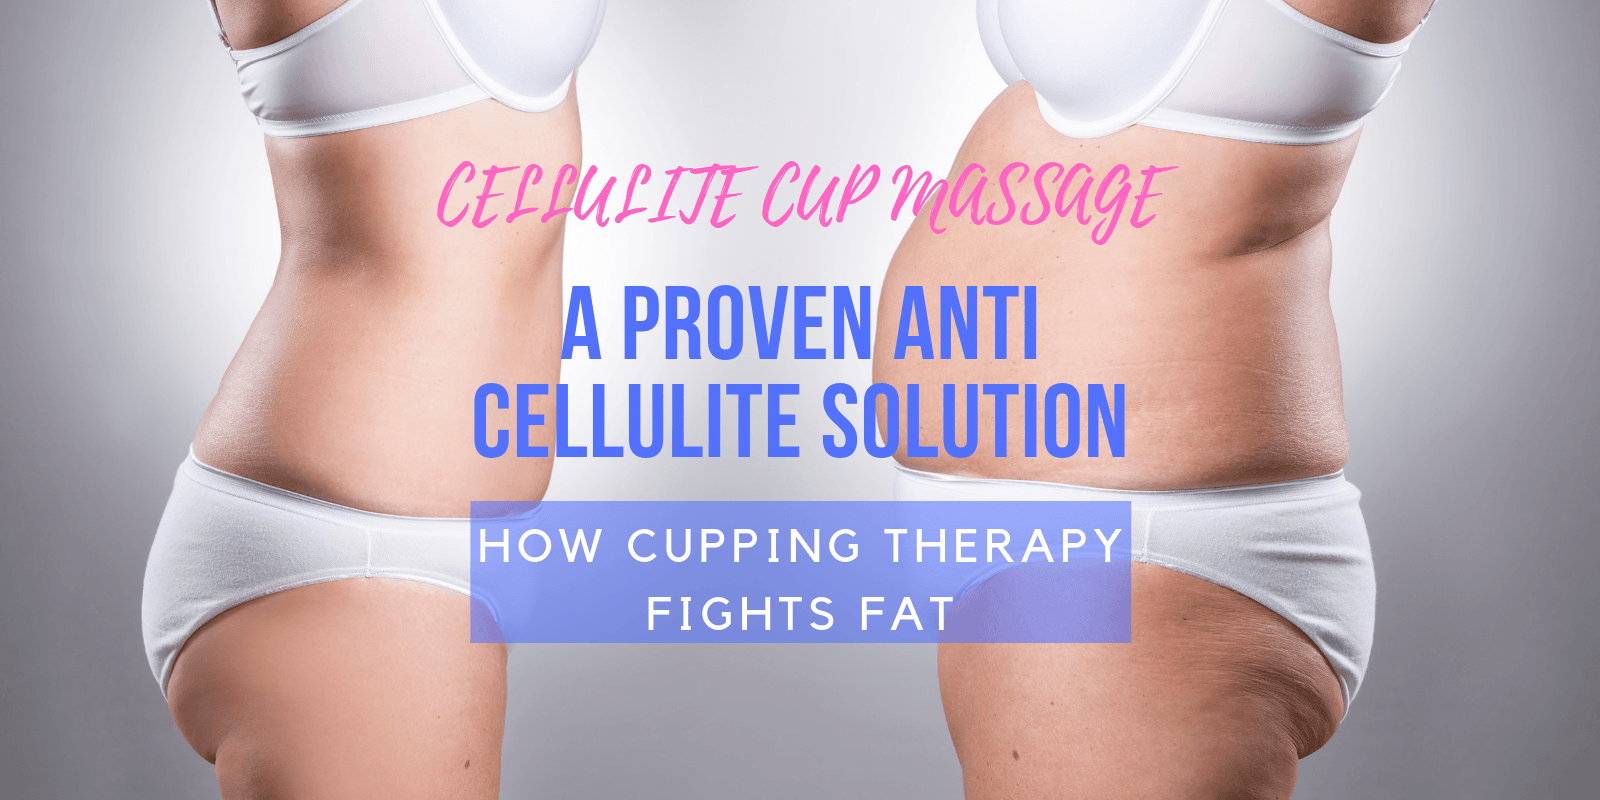 Cellulite Cup Massage, a Proven Anti Cellulite Solution - How Cupping Therapy Fights Fat - Lure Essentials